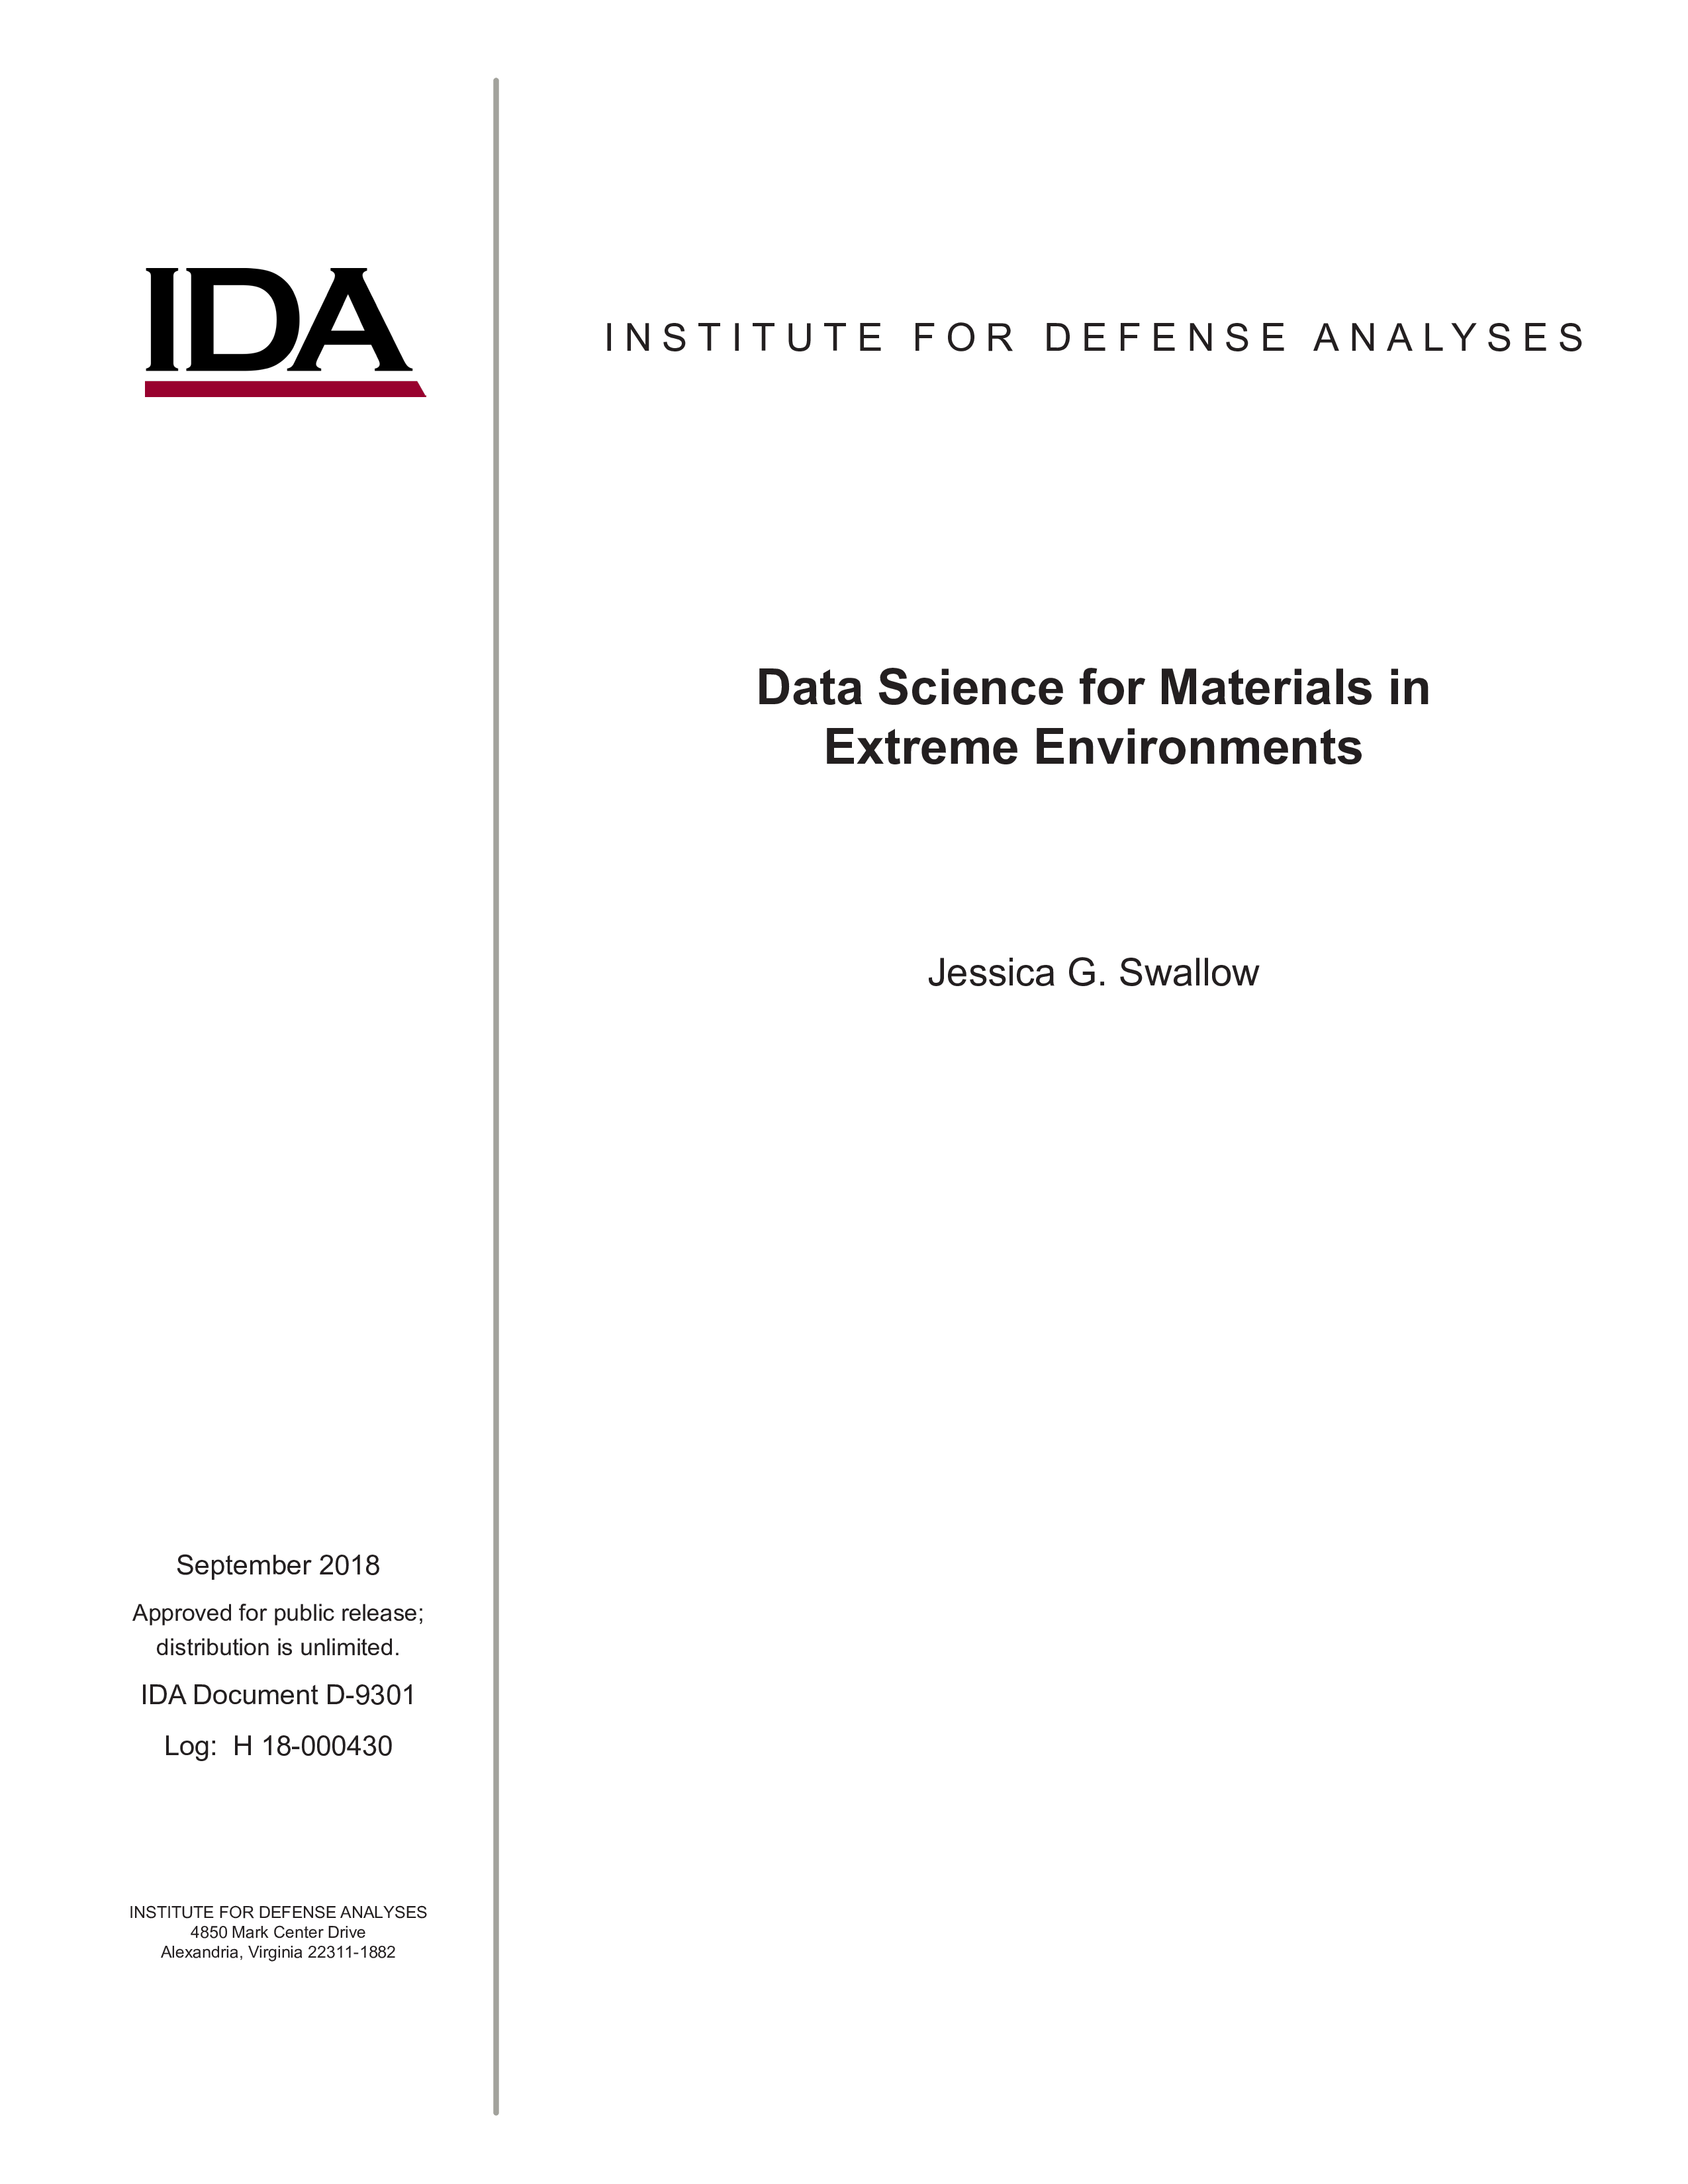 Data Science for Materials in Extreme Environments